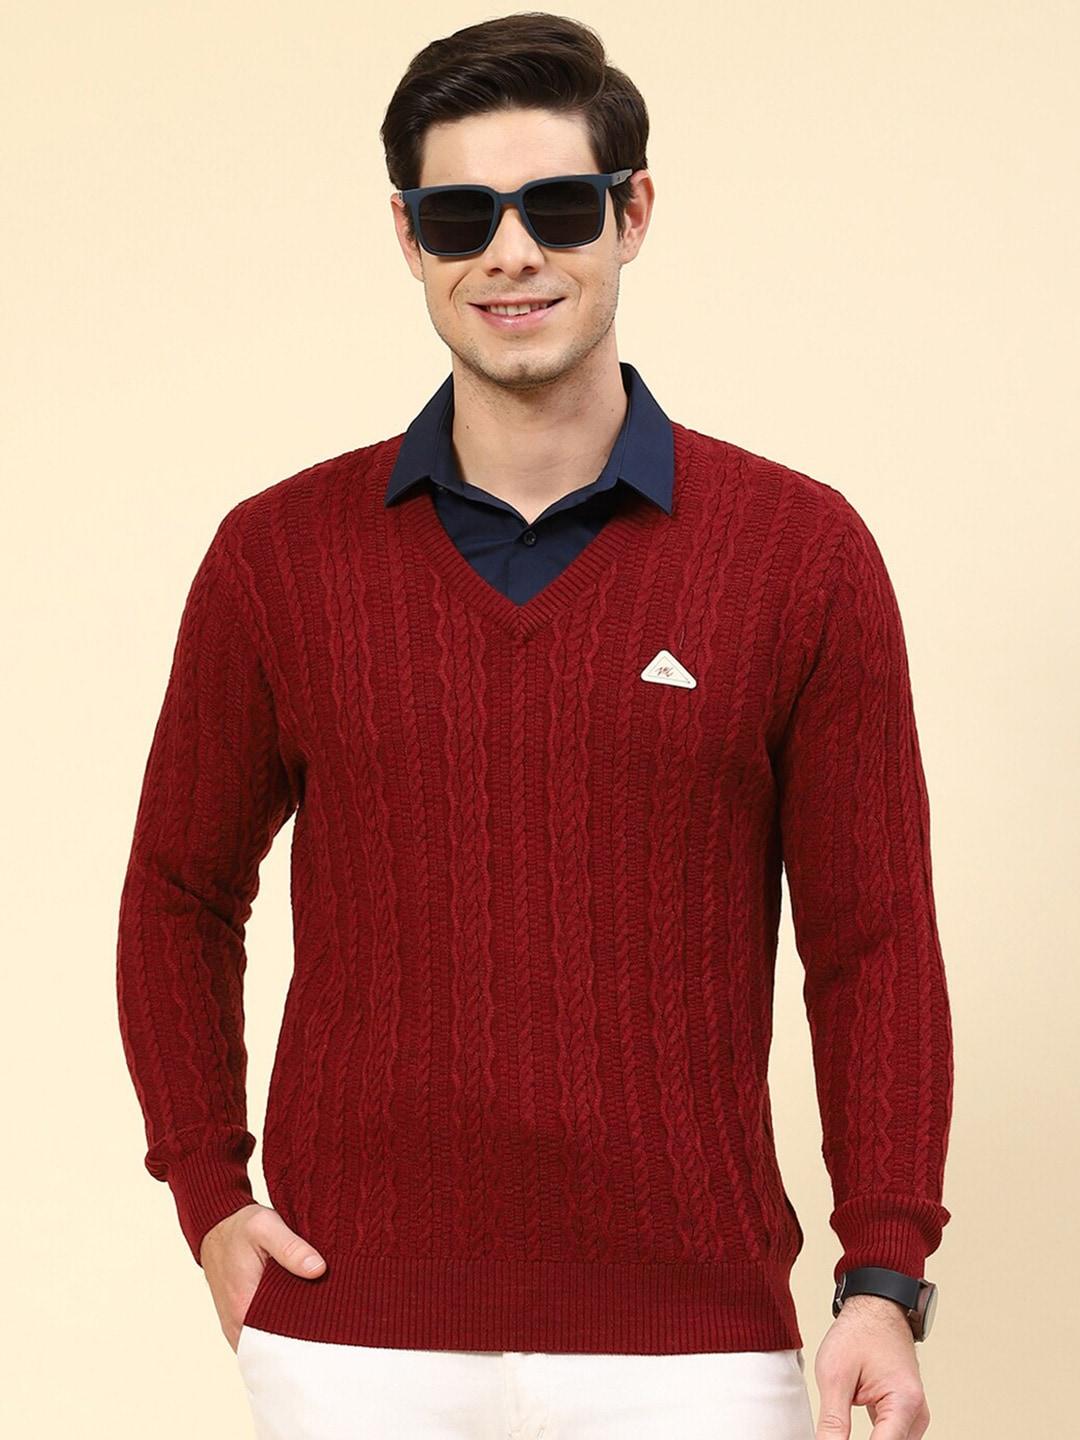 monte-carlo-v-neck-cable-knit-ribbed-pullover